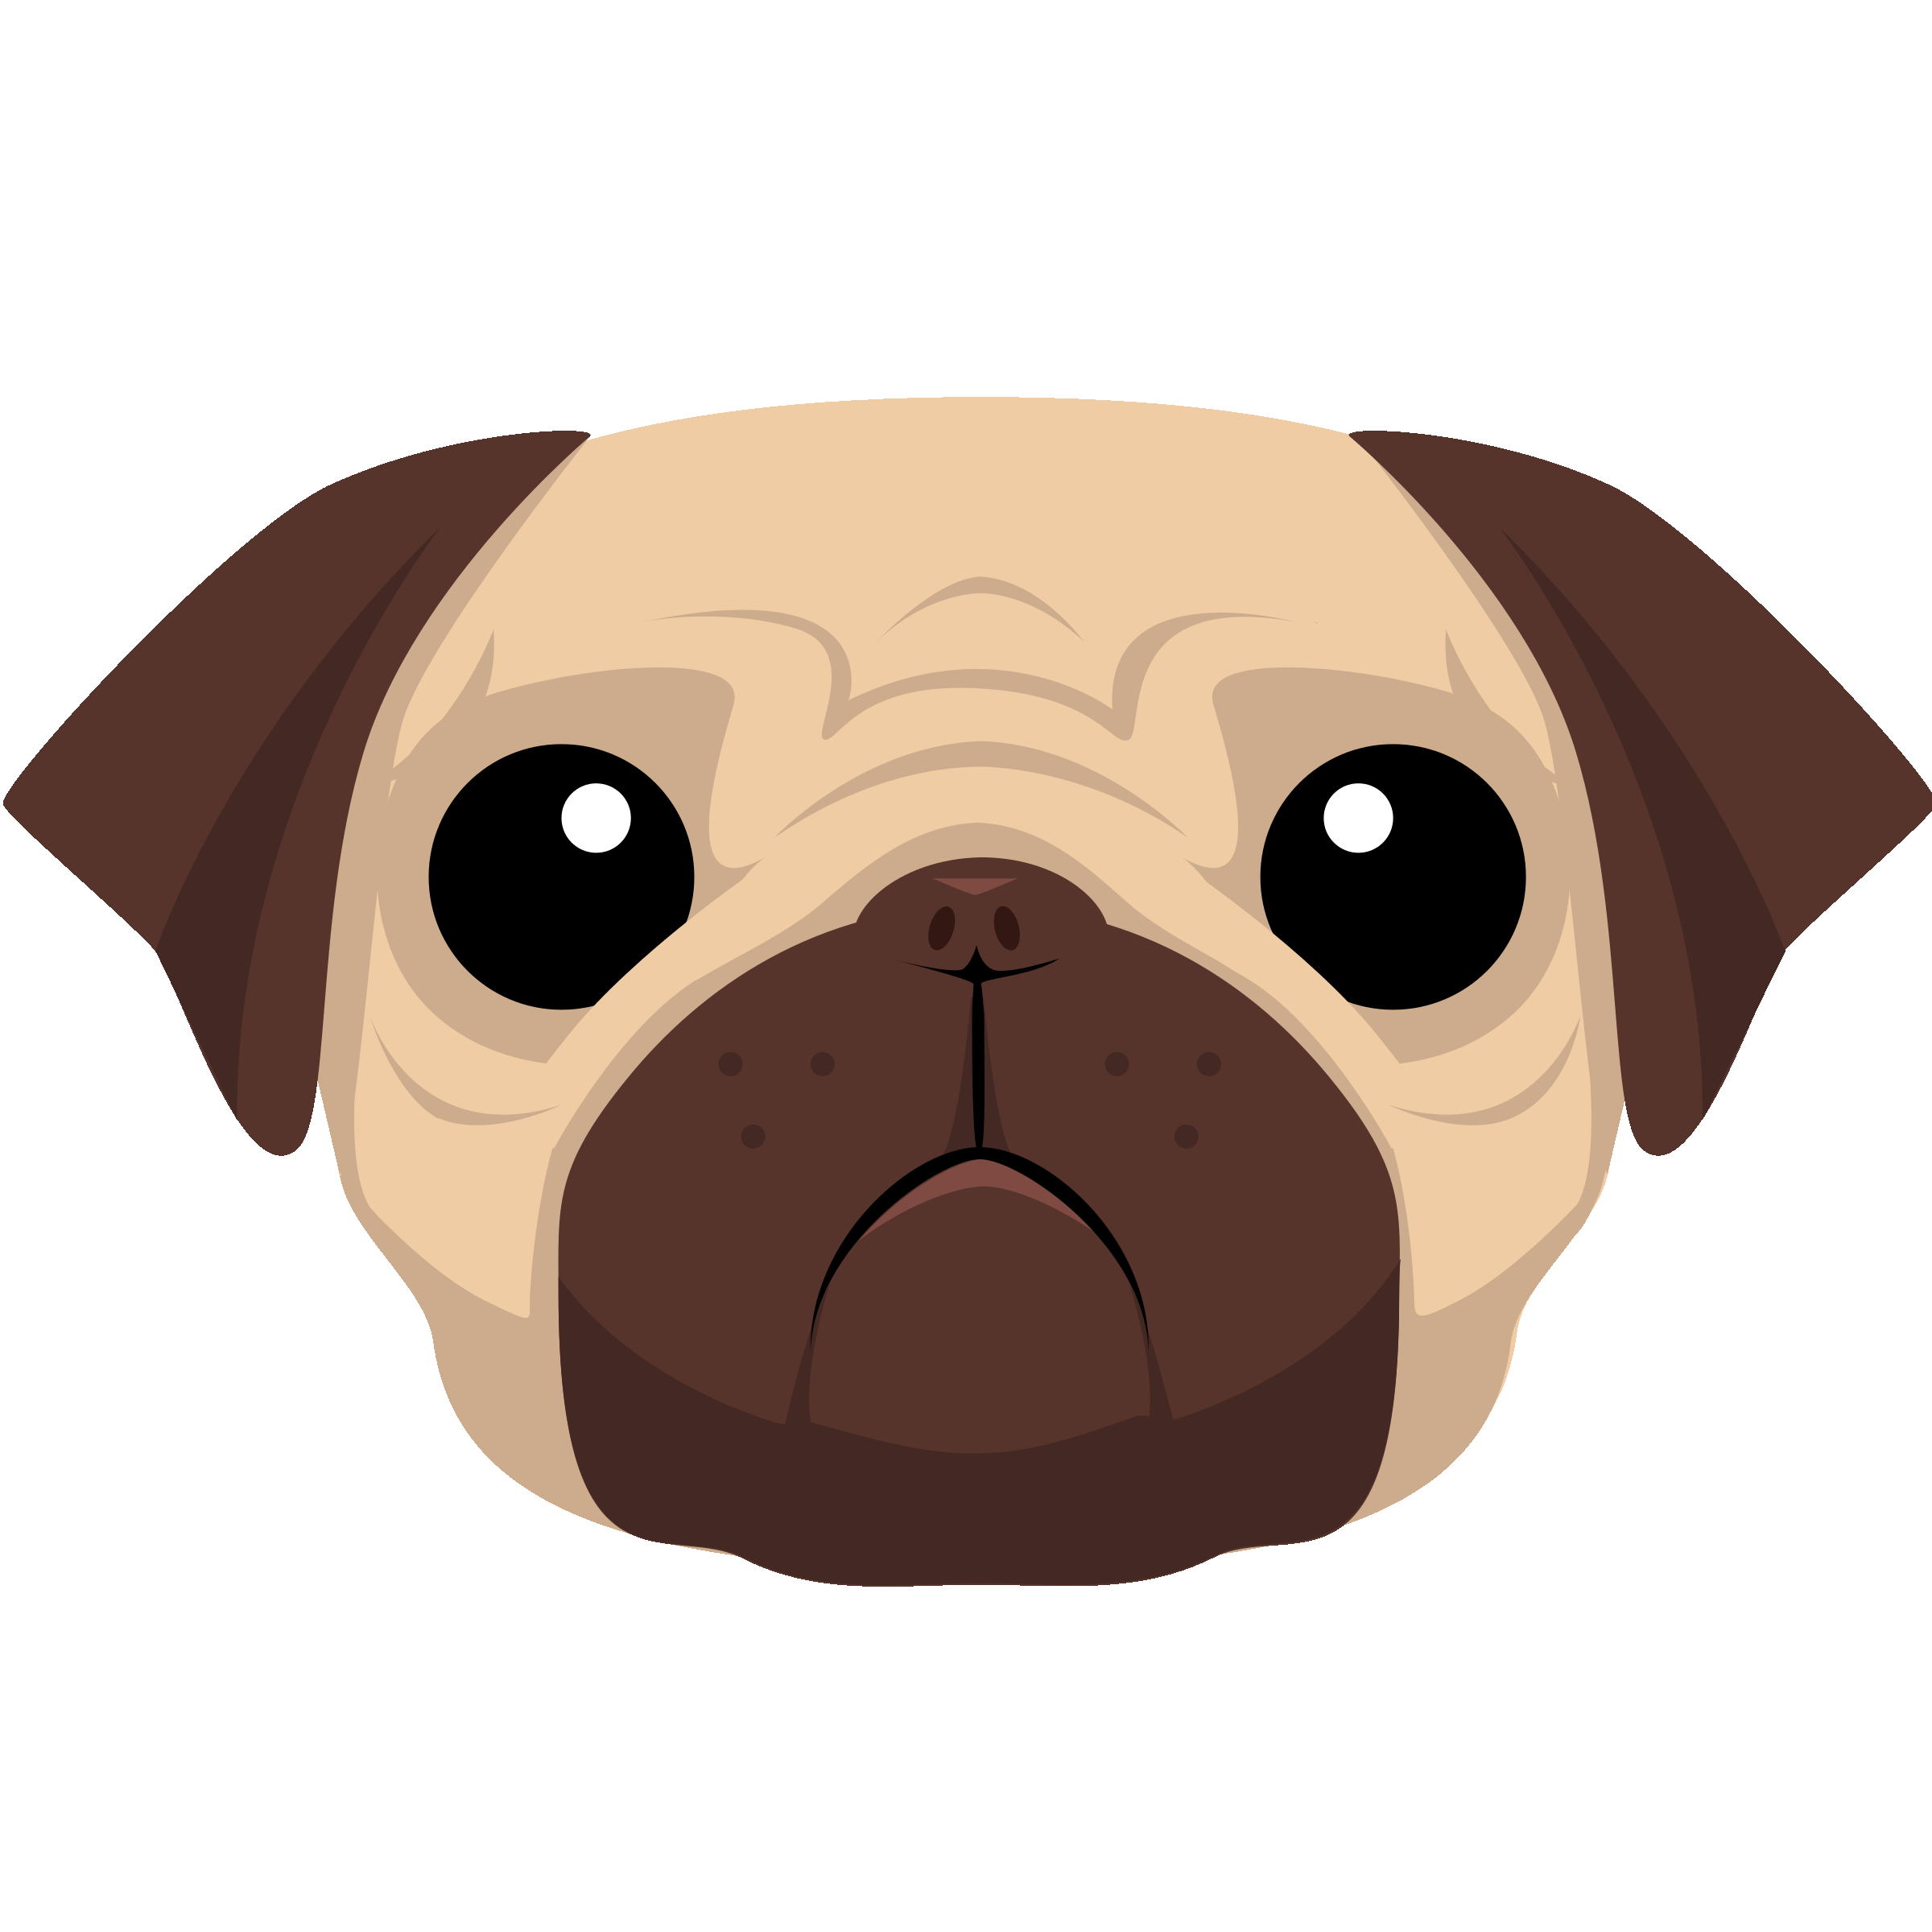 An Introduction to PUG